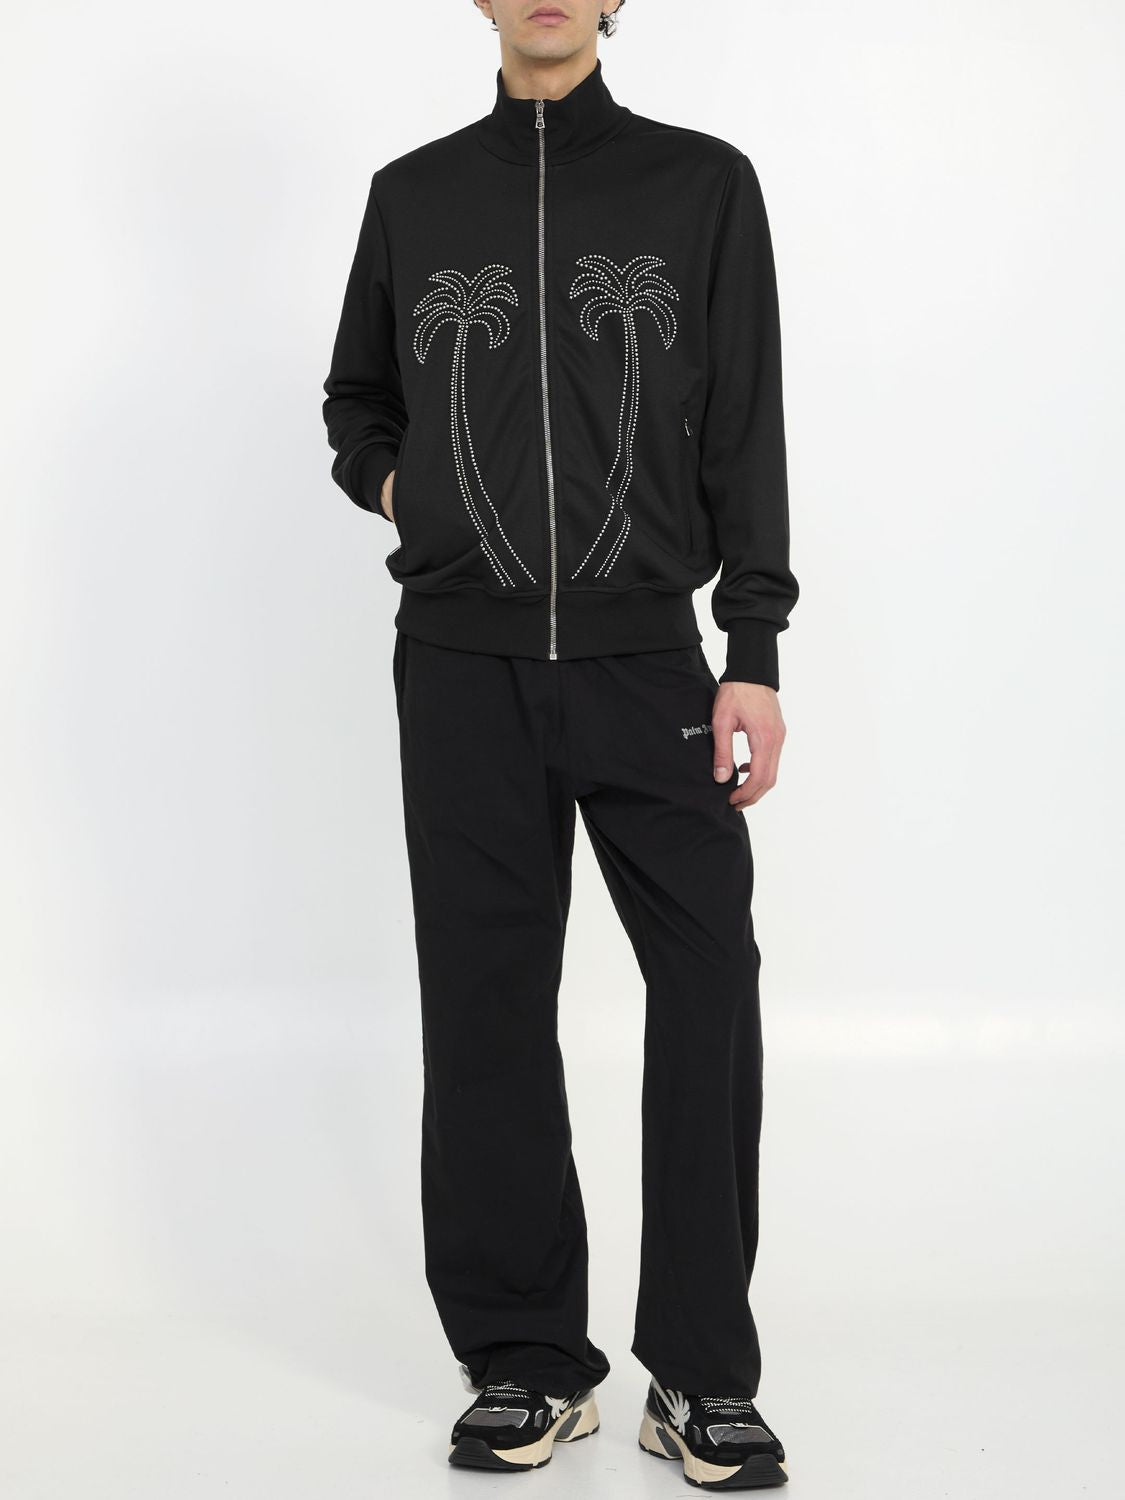 Studded Milan Track Jacket in Black with Palm Angels Logo and Motif